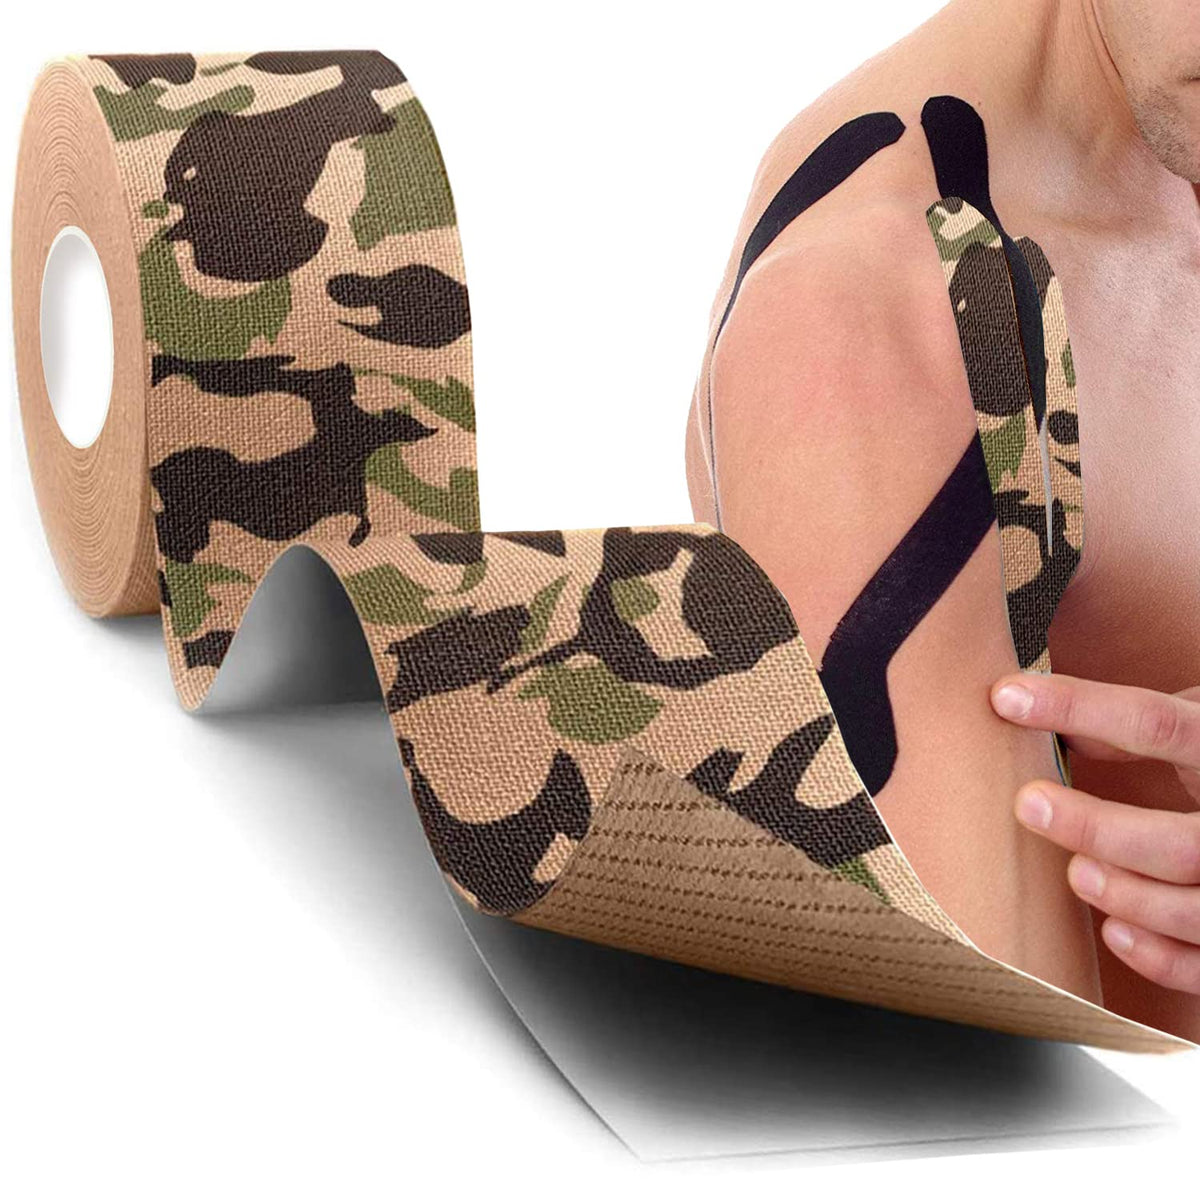 Strauss Kinesiology Sports Tape Knee, Calf & Thigh Support (Camo Green)